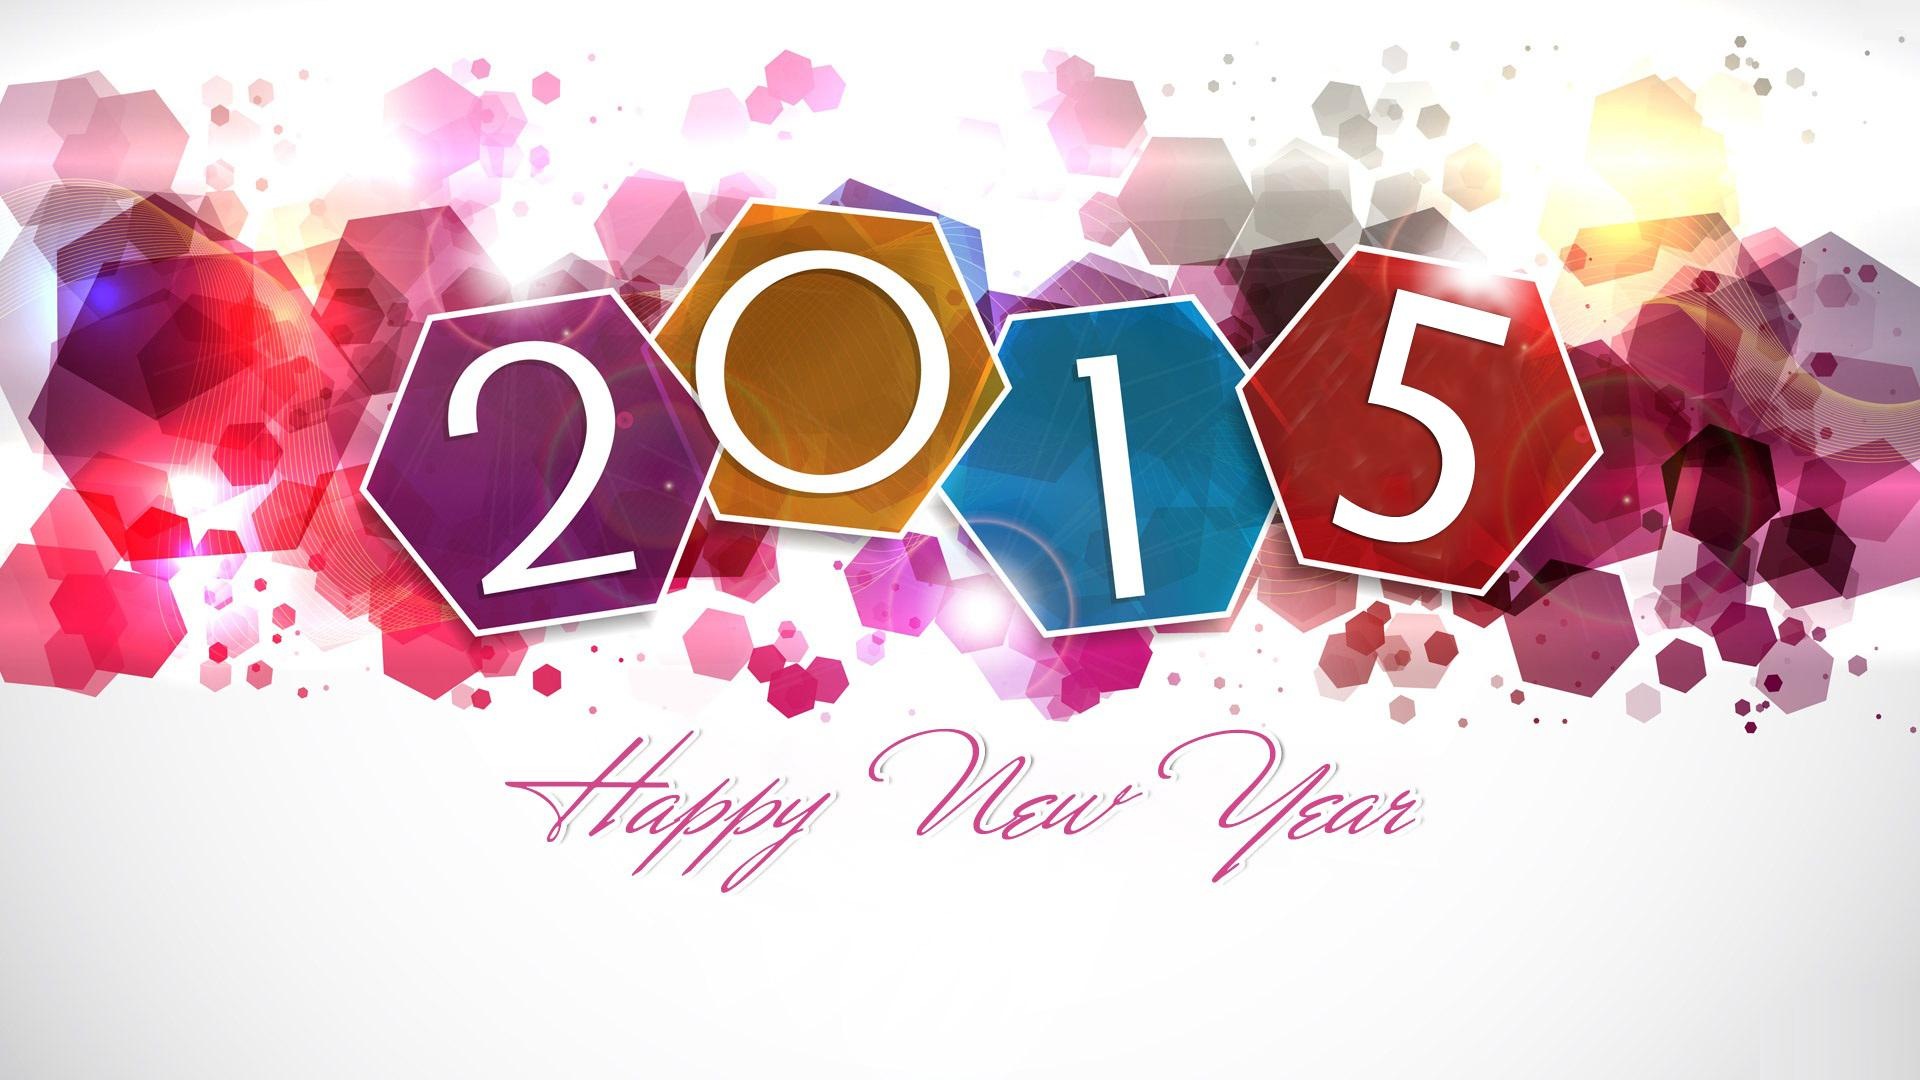 2015 New Year theme HD wallpapers (2) #17 - 1920x1080